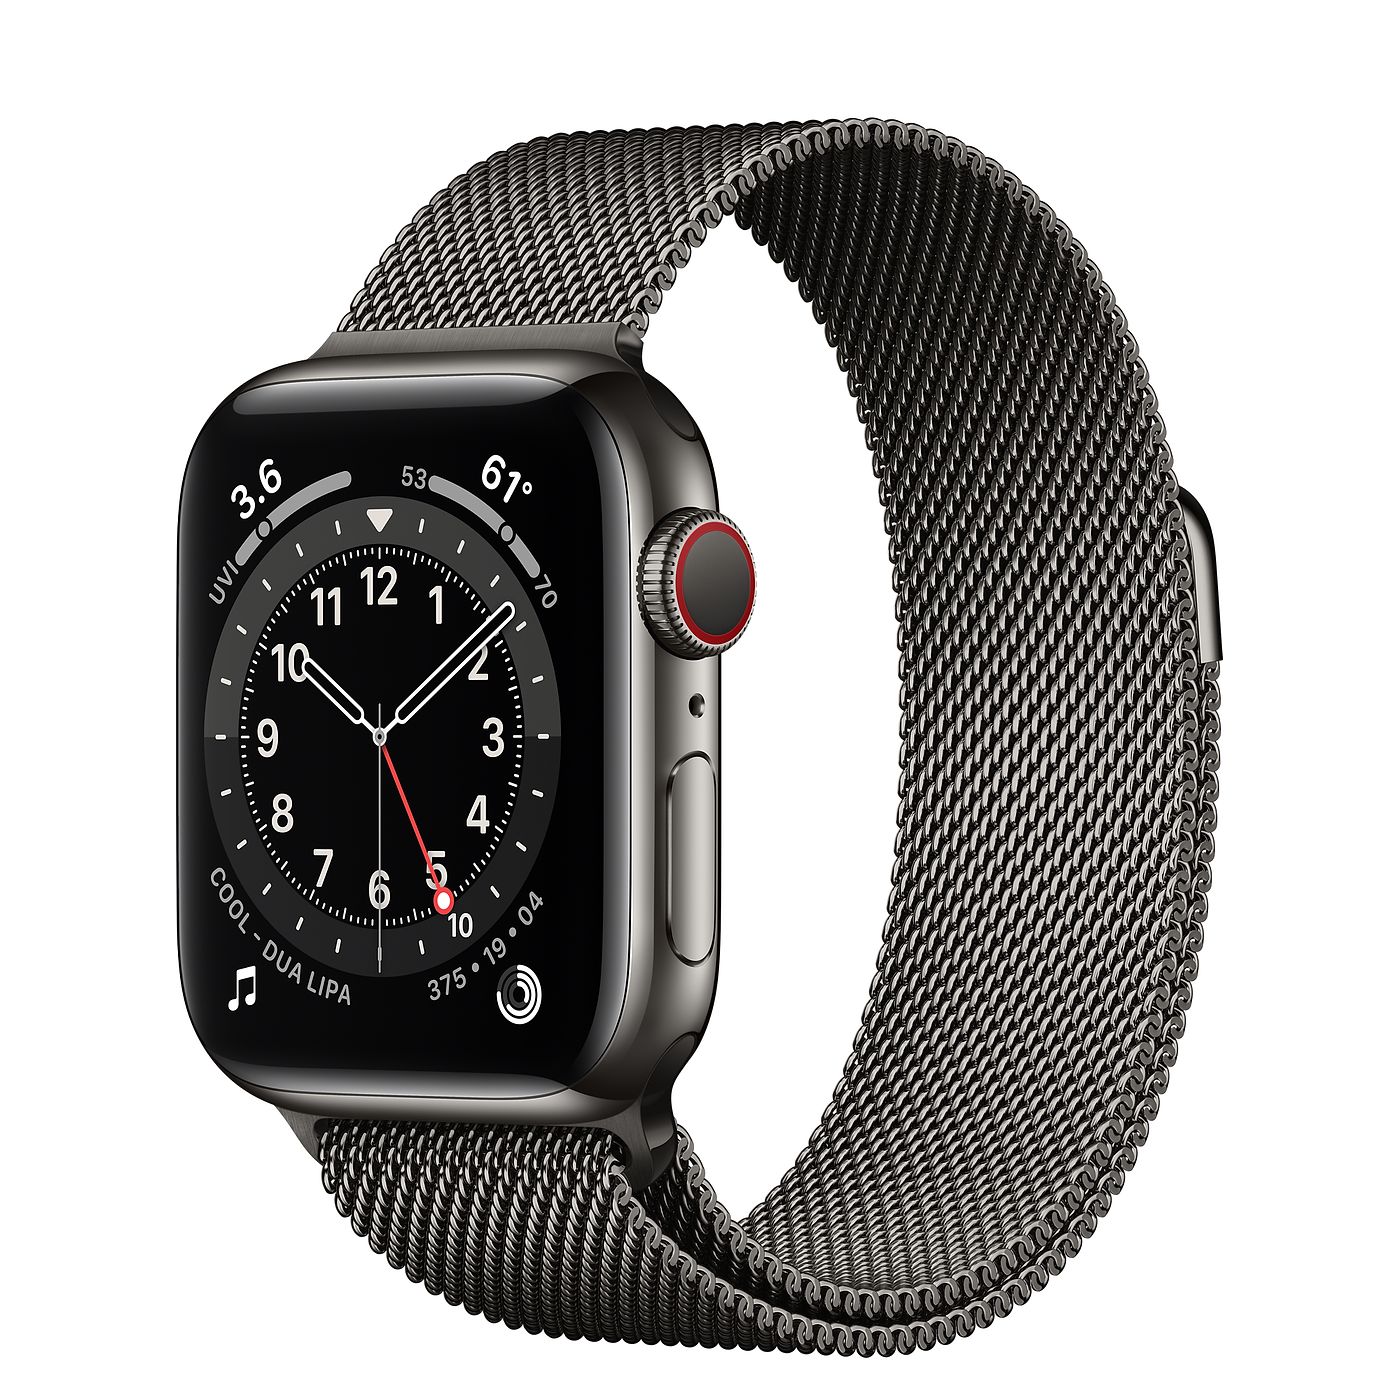 Apple Watch Series 6 GPS + Cellular 40mm Graphite Stainless Steel